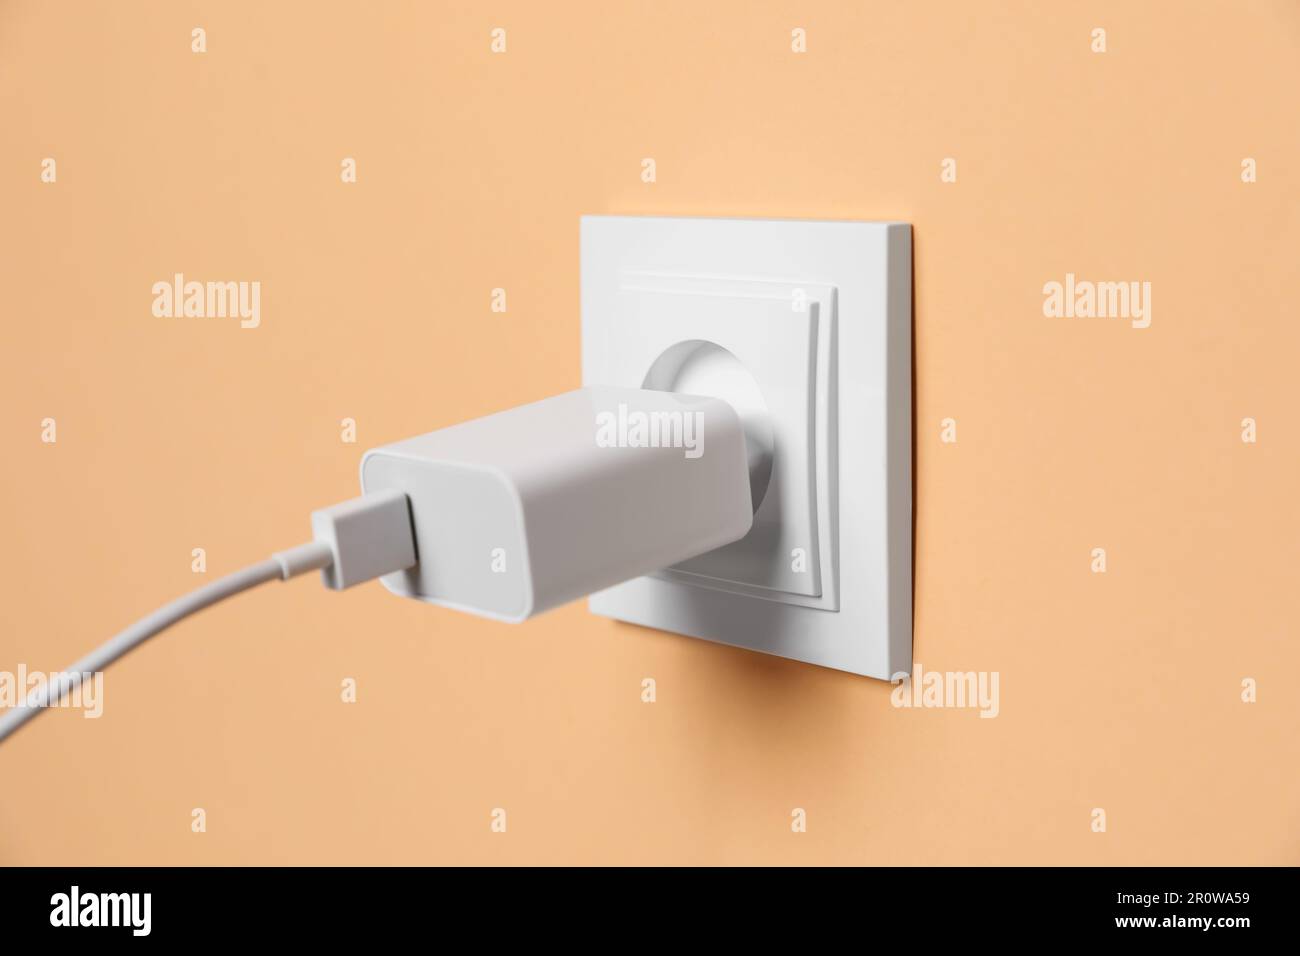 Charger adapter plugged into power socket on pale orange wall, closeup. Electrical supply Stock Photo